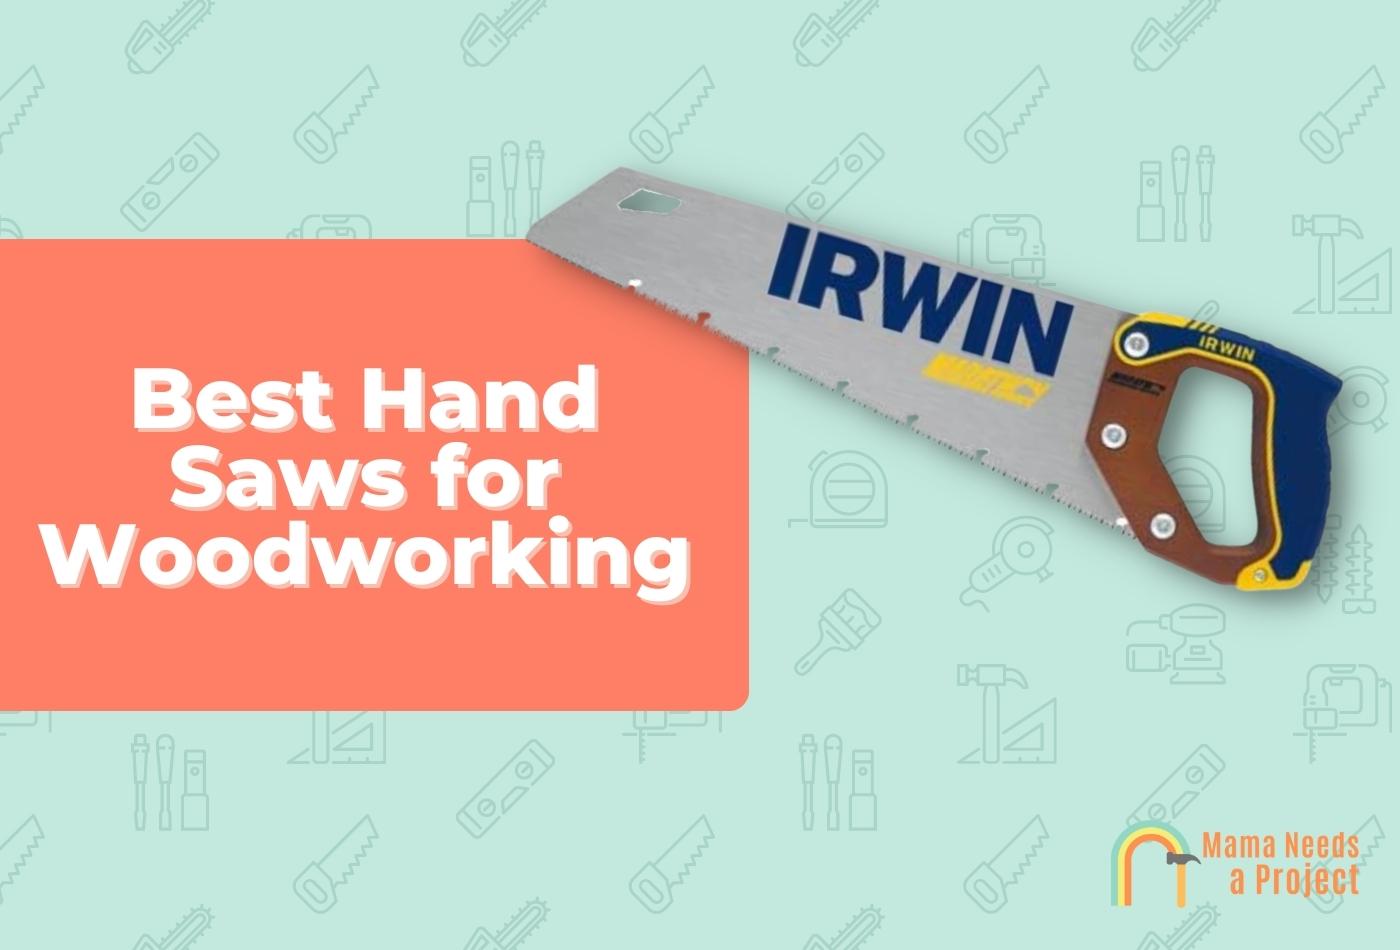 Best Hand Saws for Woodworking